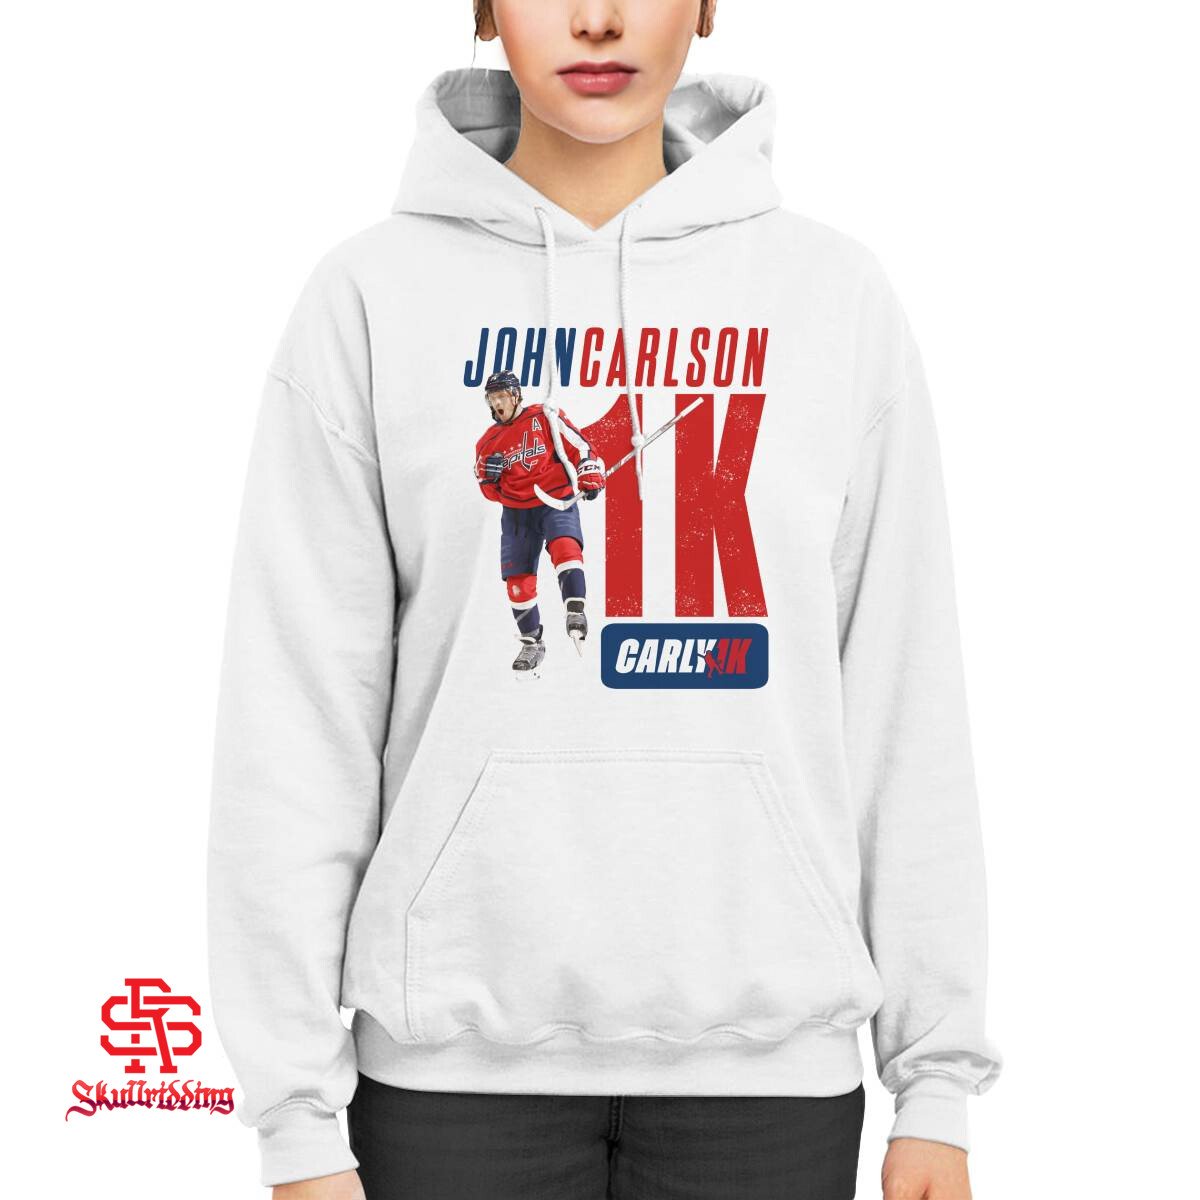 This special edition Washington Capitals T-shirt honors defenseman John Carlson's monumental achievement of playing in 1,000 NHL games!
'Buy John Carlson Celebrate 1,000-game Carly1K T-Shirt White'. Link product here: skullridding.com/products/carls…
#skullridding #carly1k #capitals